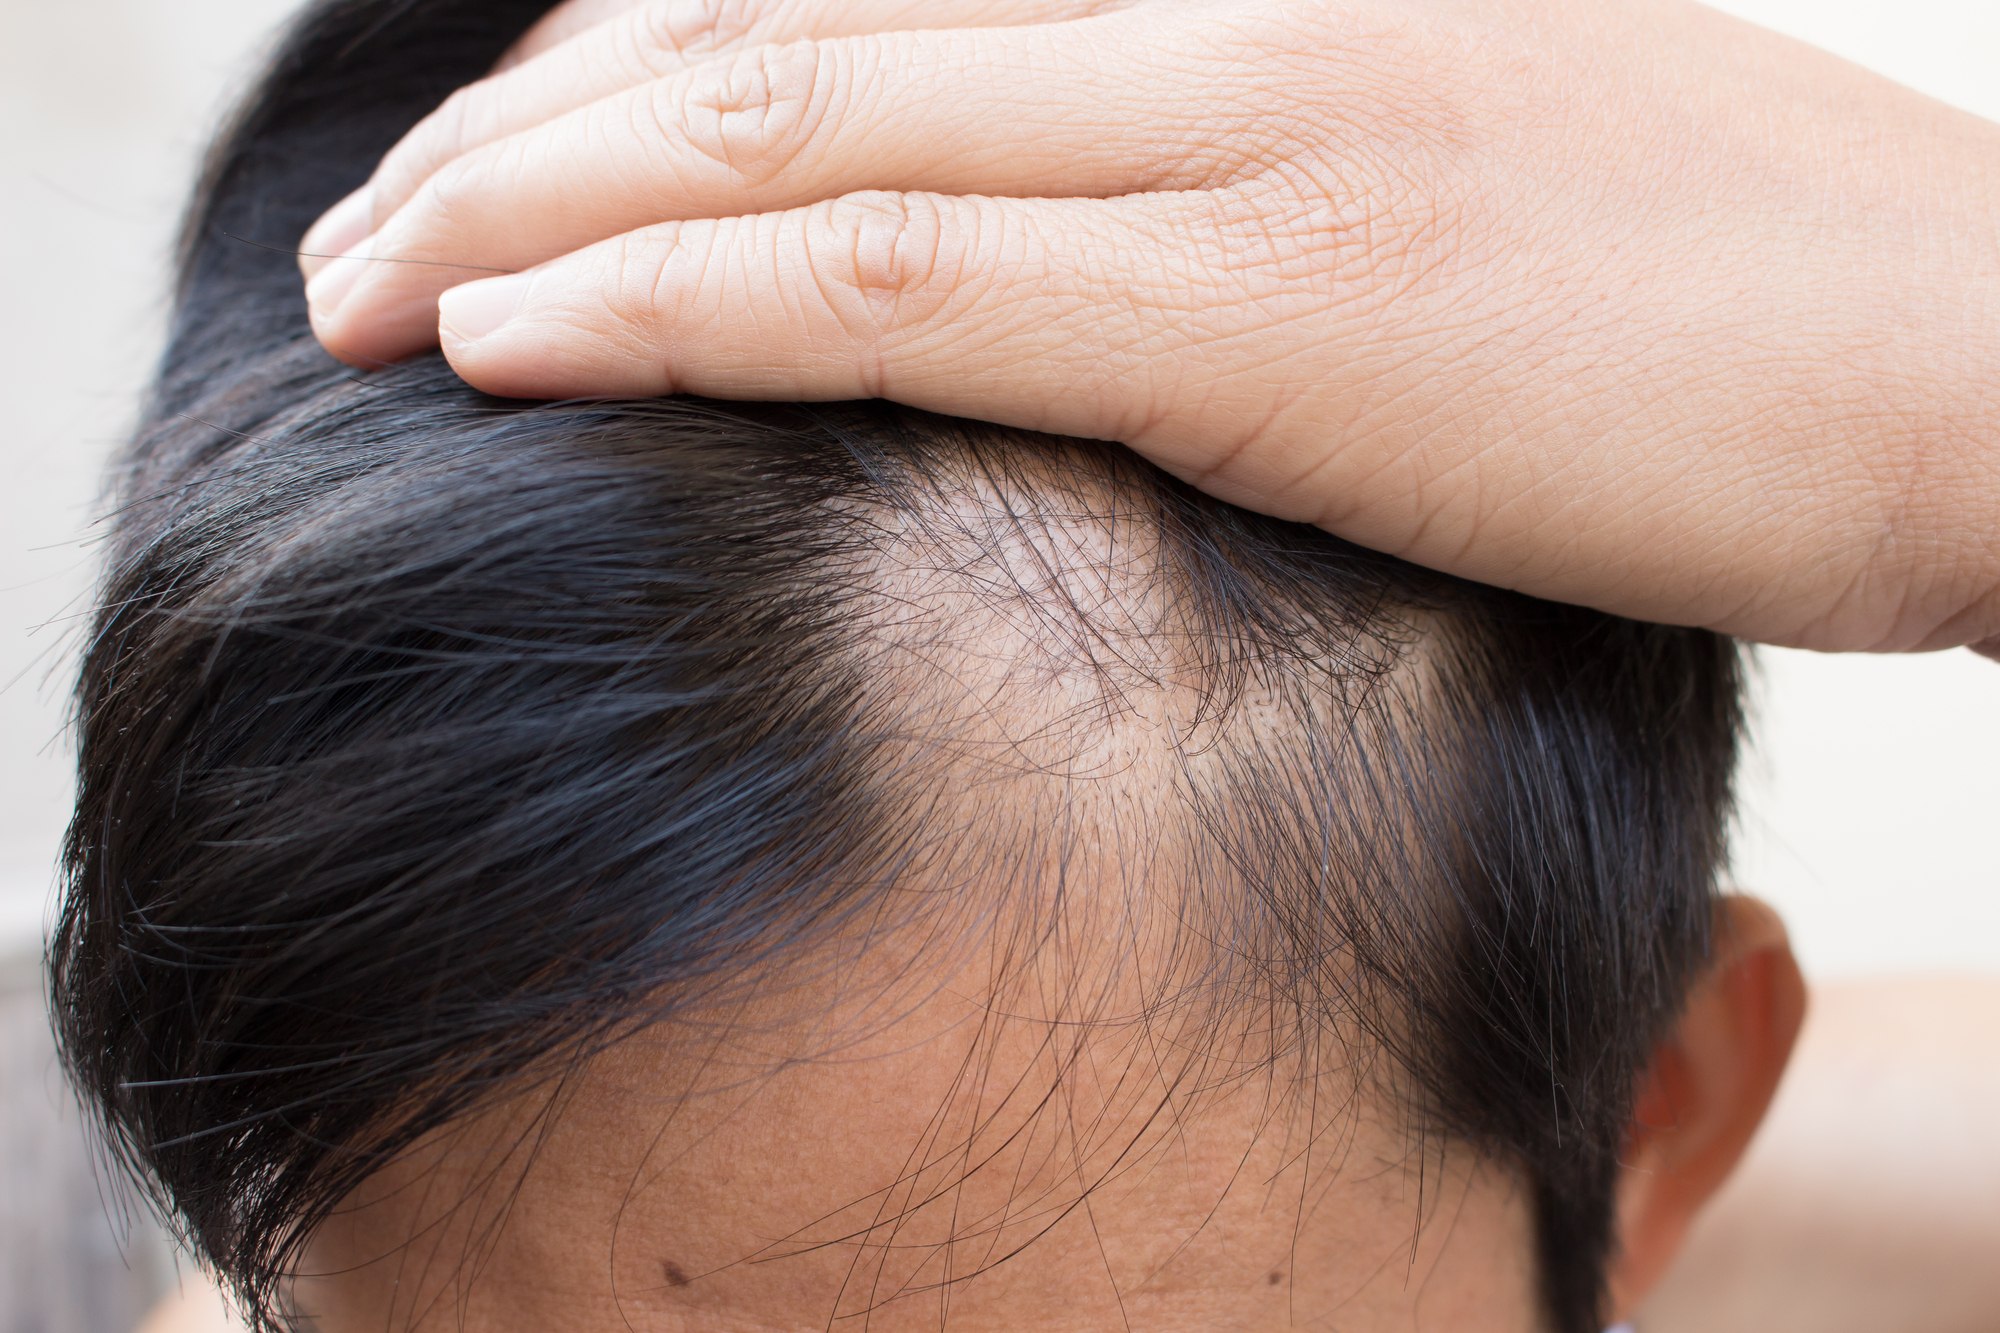 FDA approves first-ever treatment for severe alopecia | Popular Science